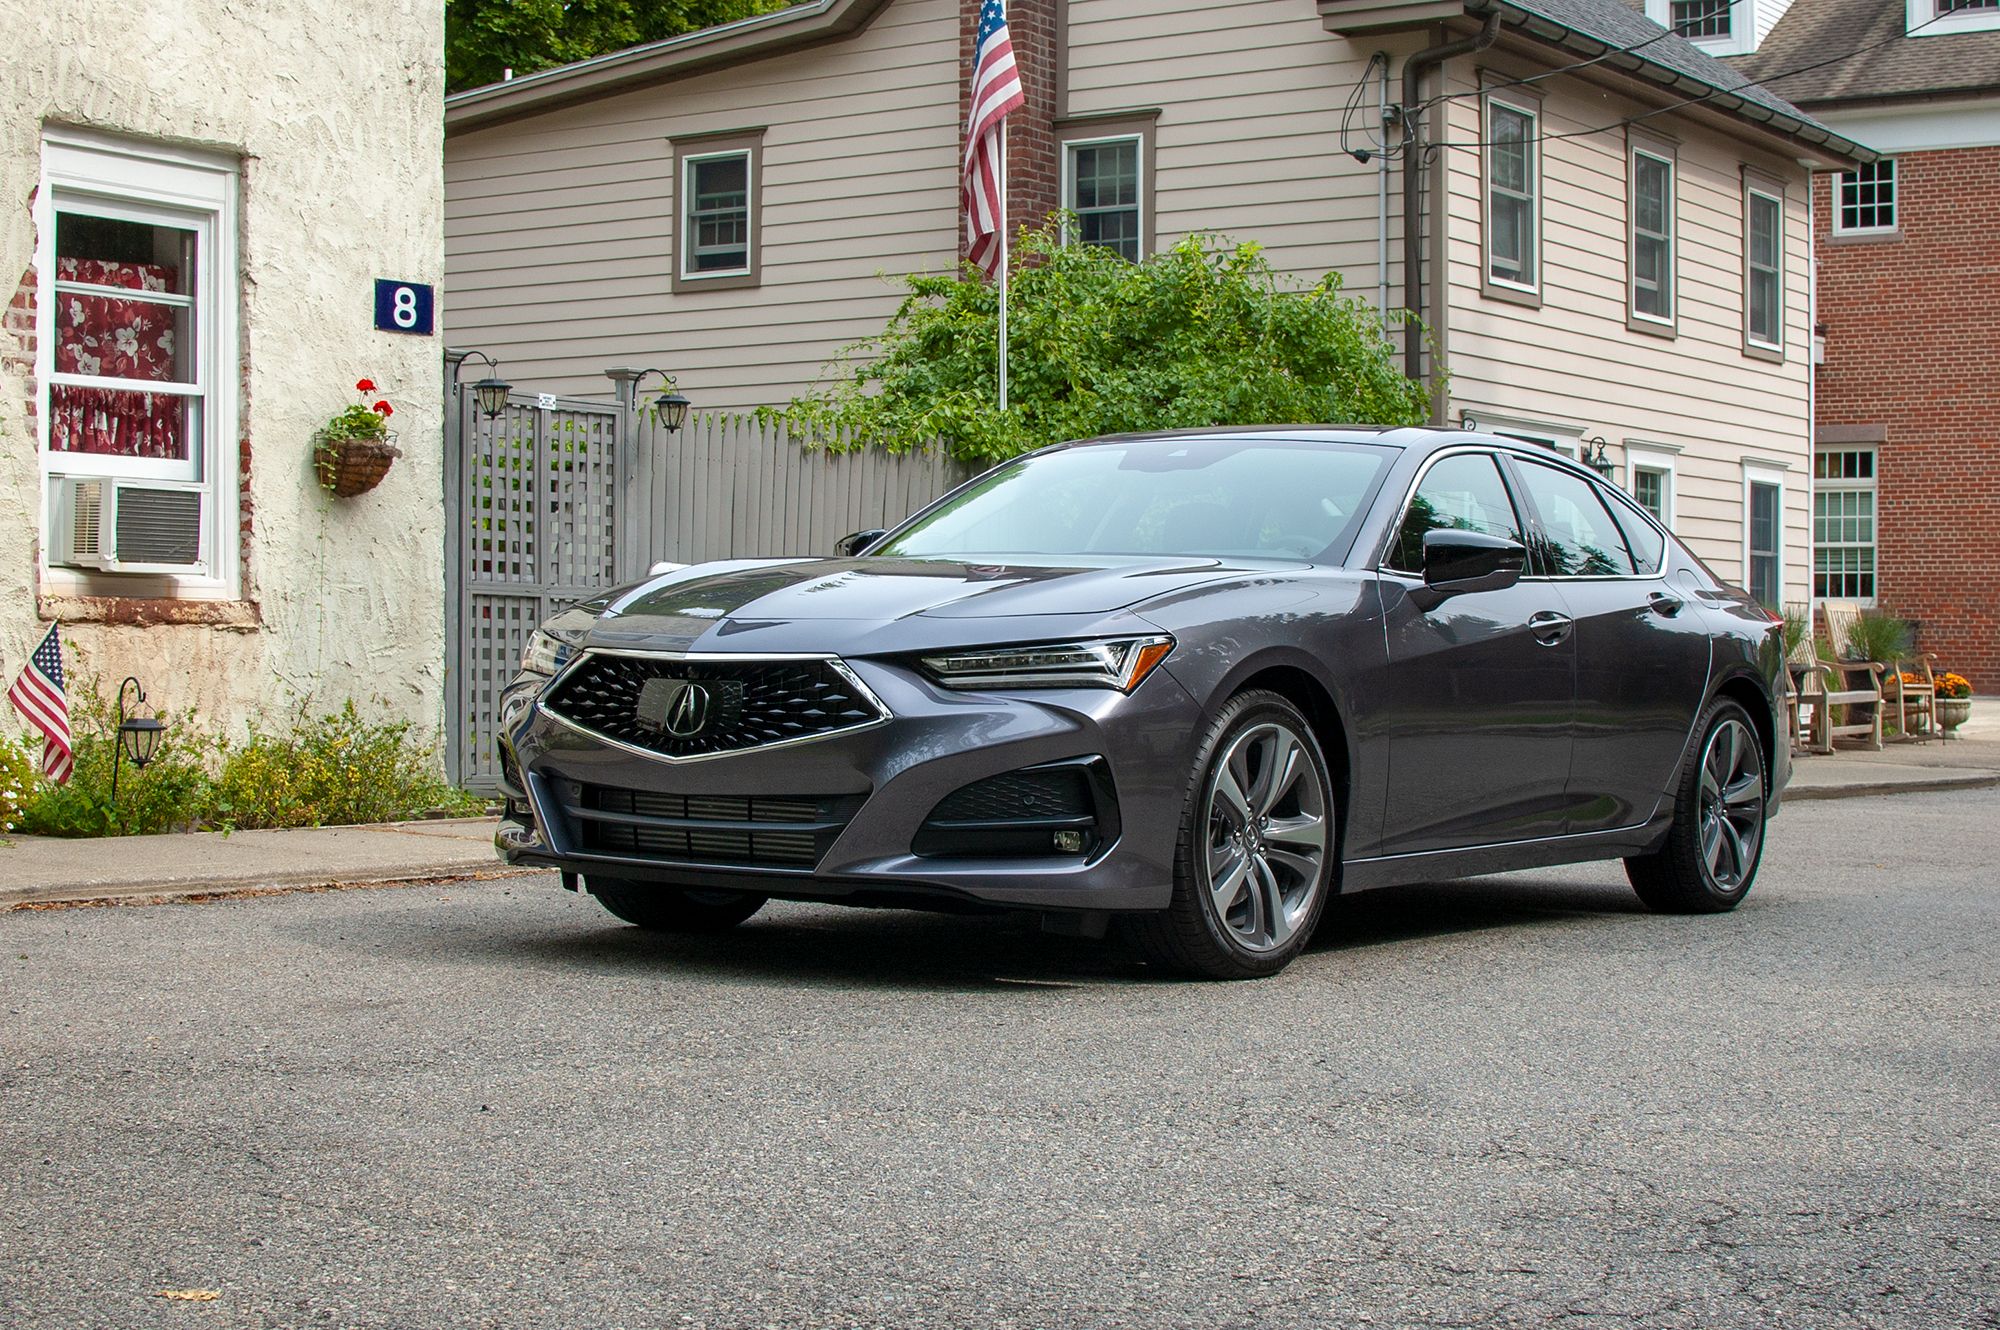 2021 Acura TLX First Drive Review - Pictures, Driving Impressions